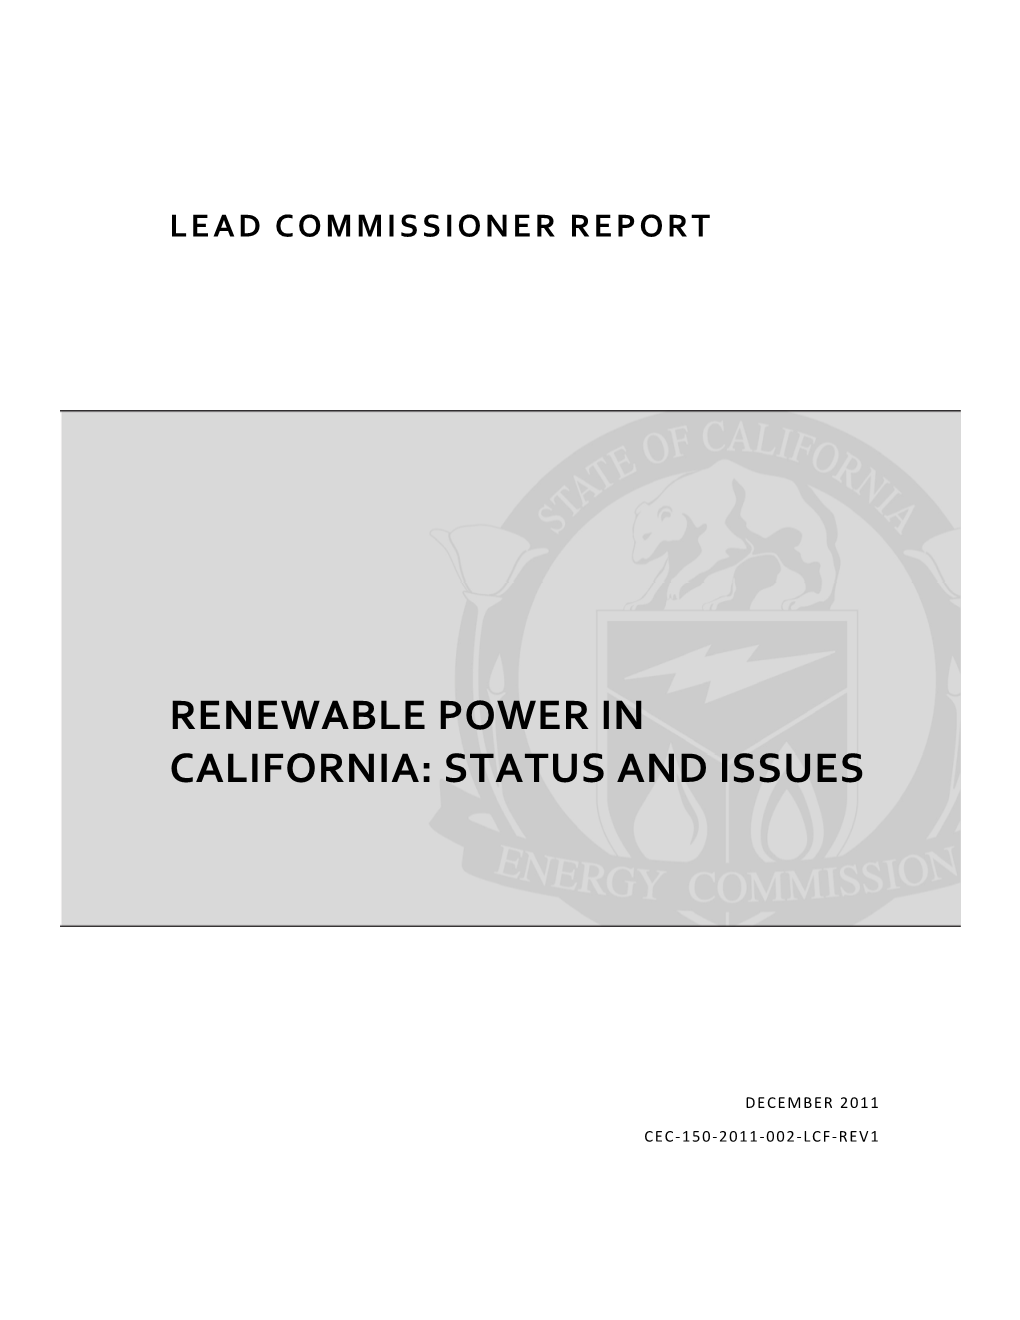 Renewable Power in California: Status and Issues